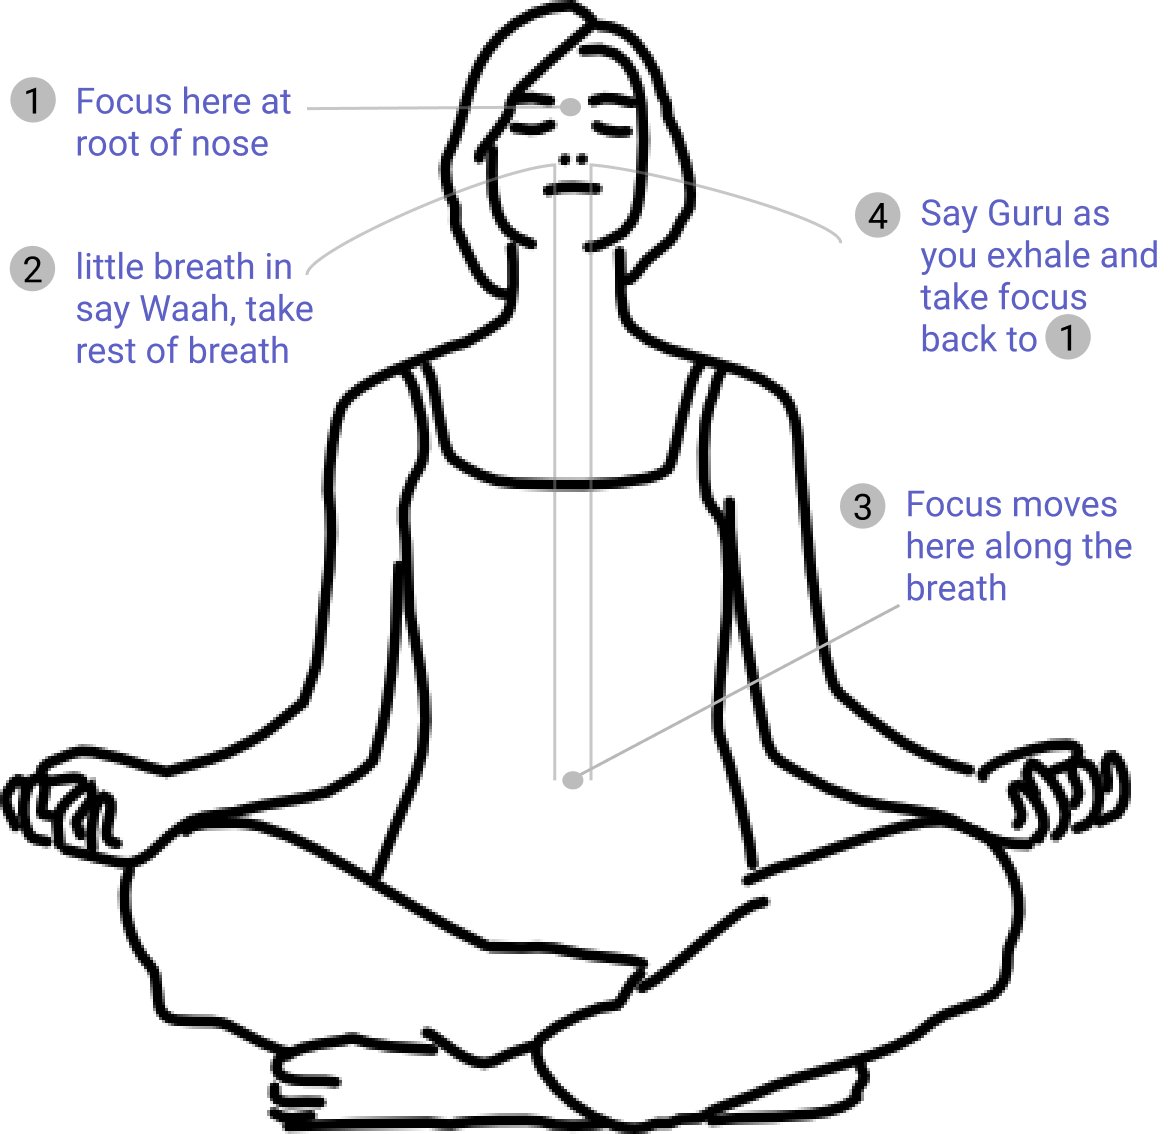 Technique:1.) Take a little breath in, Say Waah(what it sounds like) take rest of breath till the navel(let focus travel with the breath). Focus went from Waah at the root of nose to the belly button as the air goes down towards it.(The why I’ll explain in another thread)